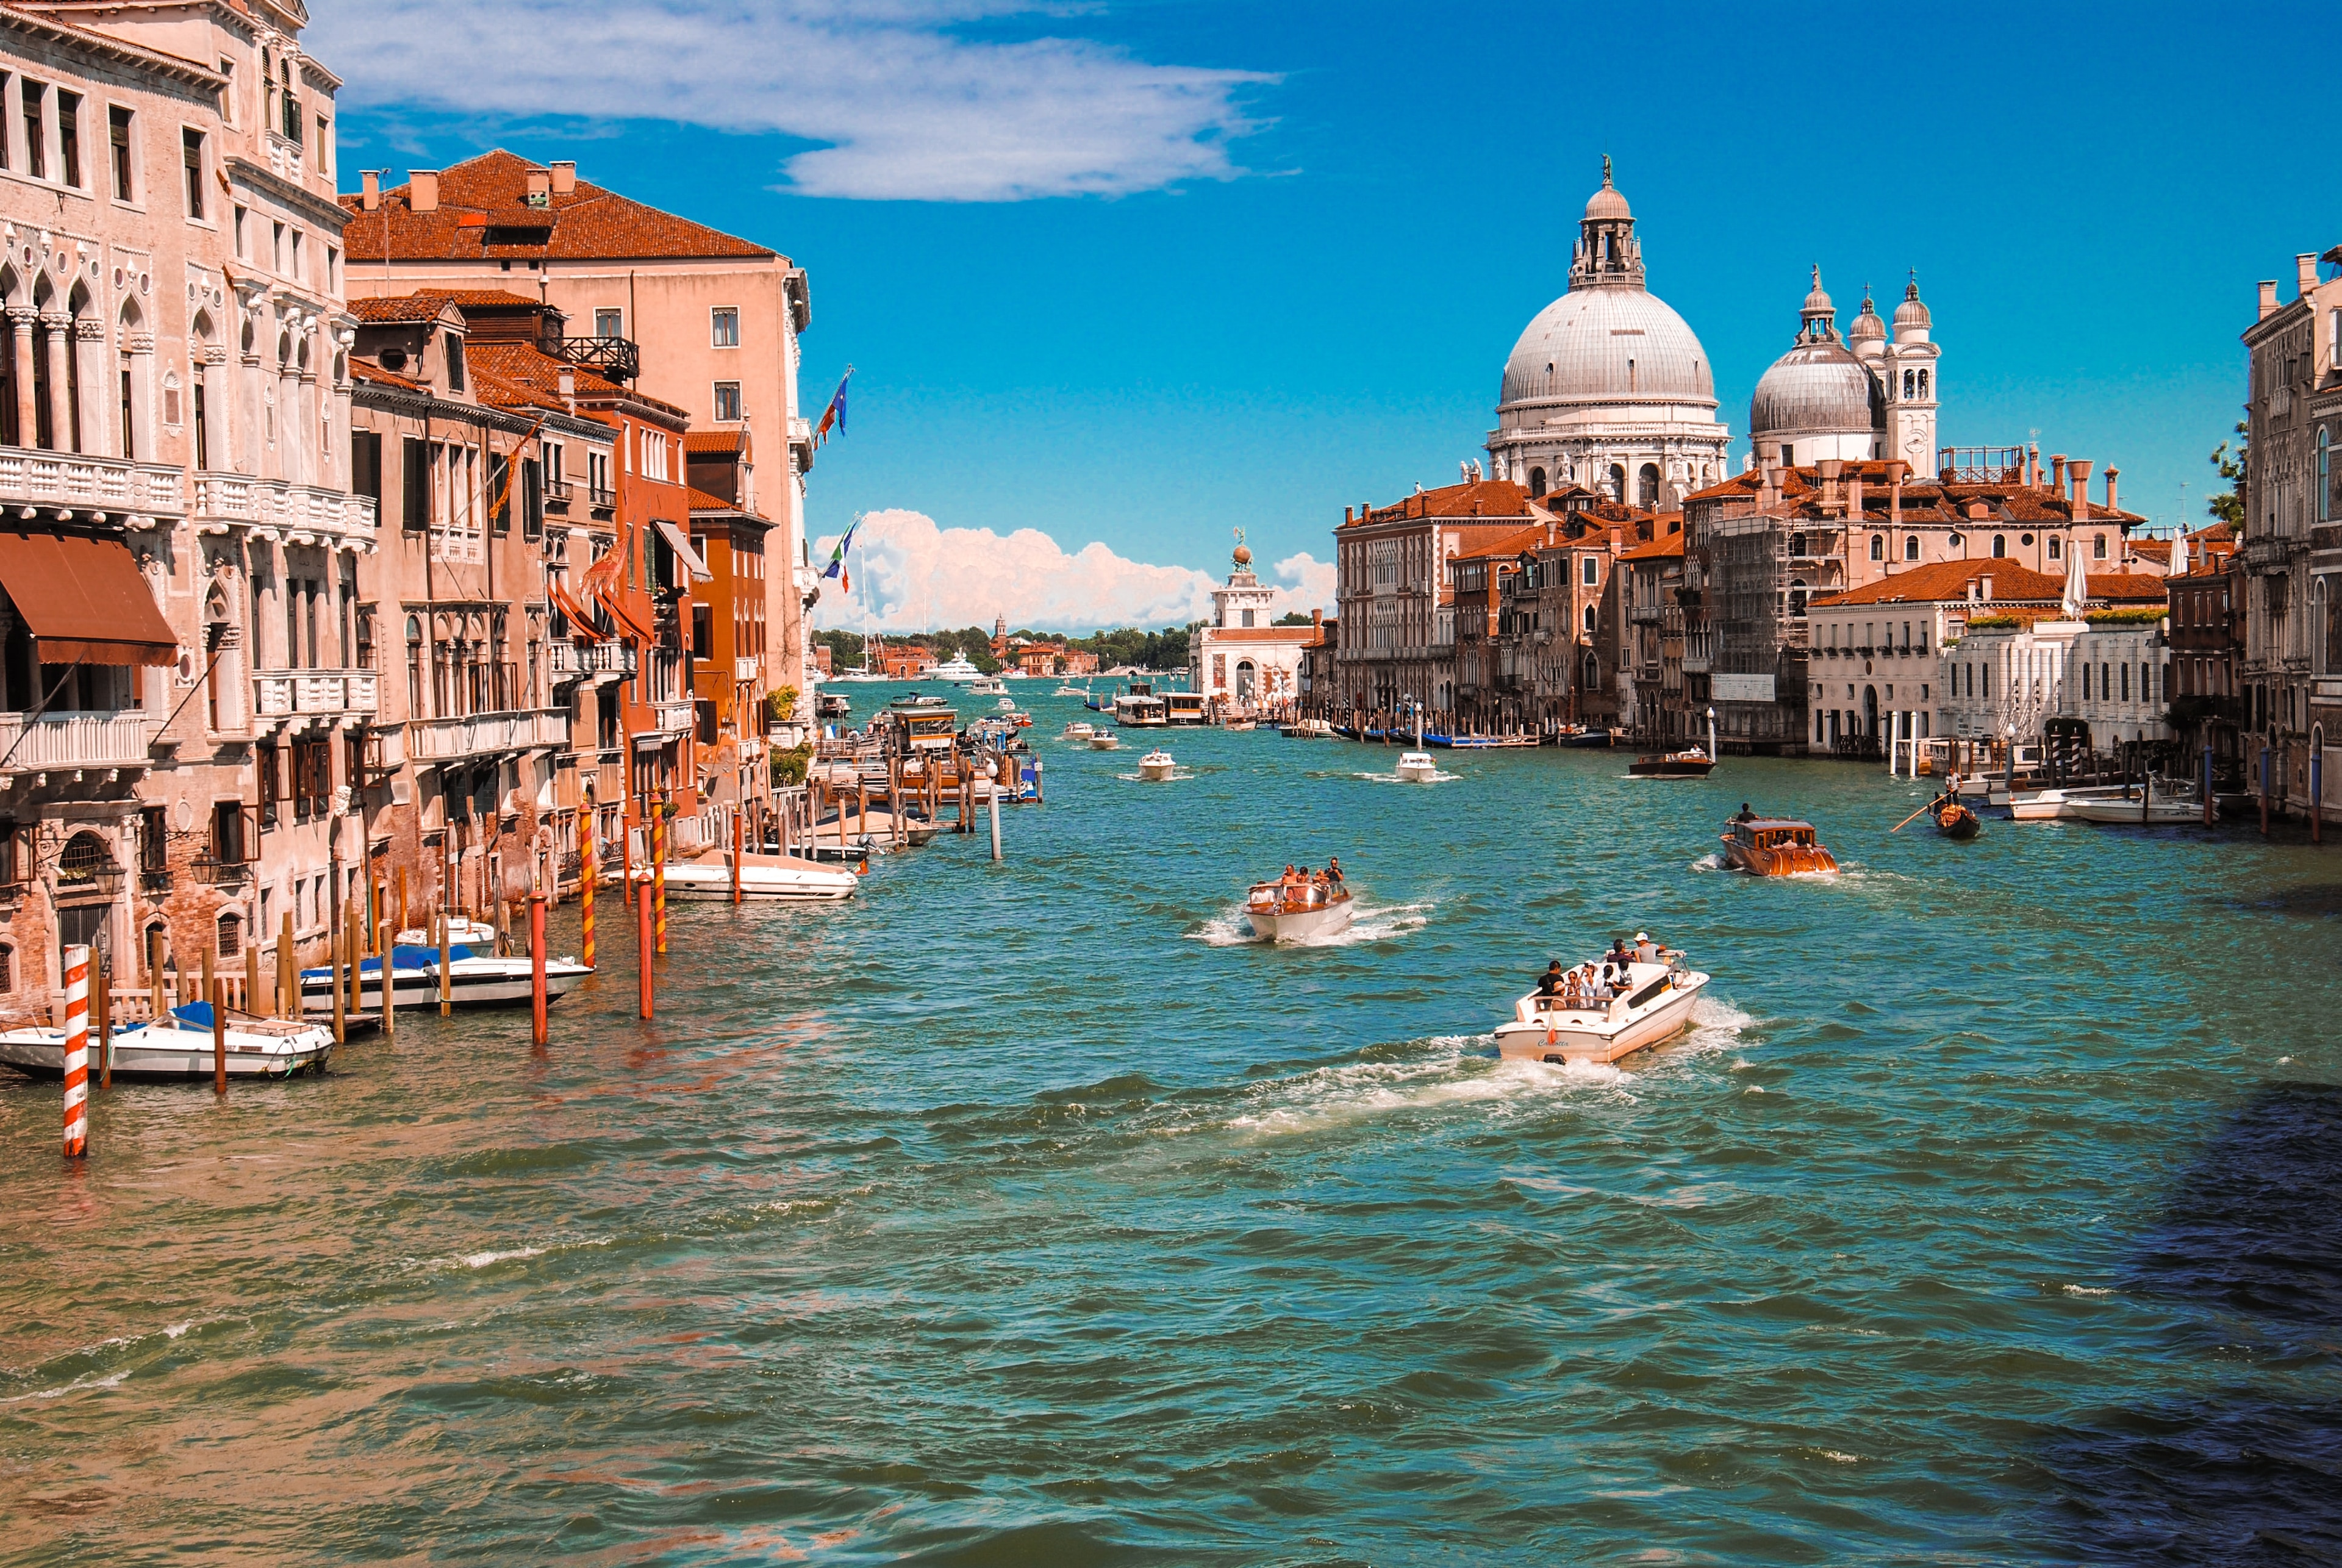 The most beautiful palaces facing the Grand Canal in Venice, italy